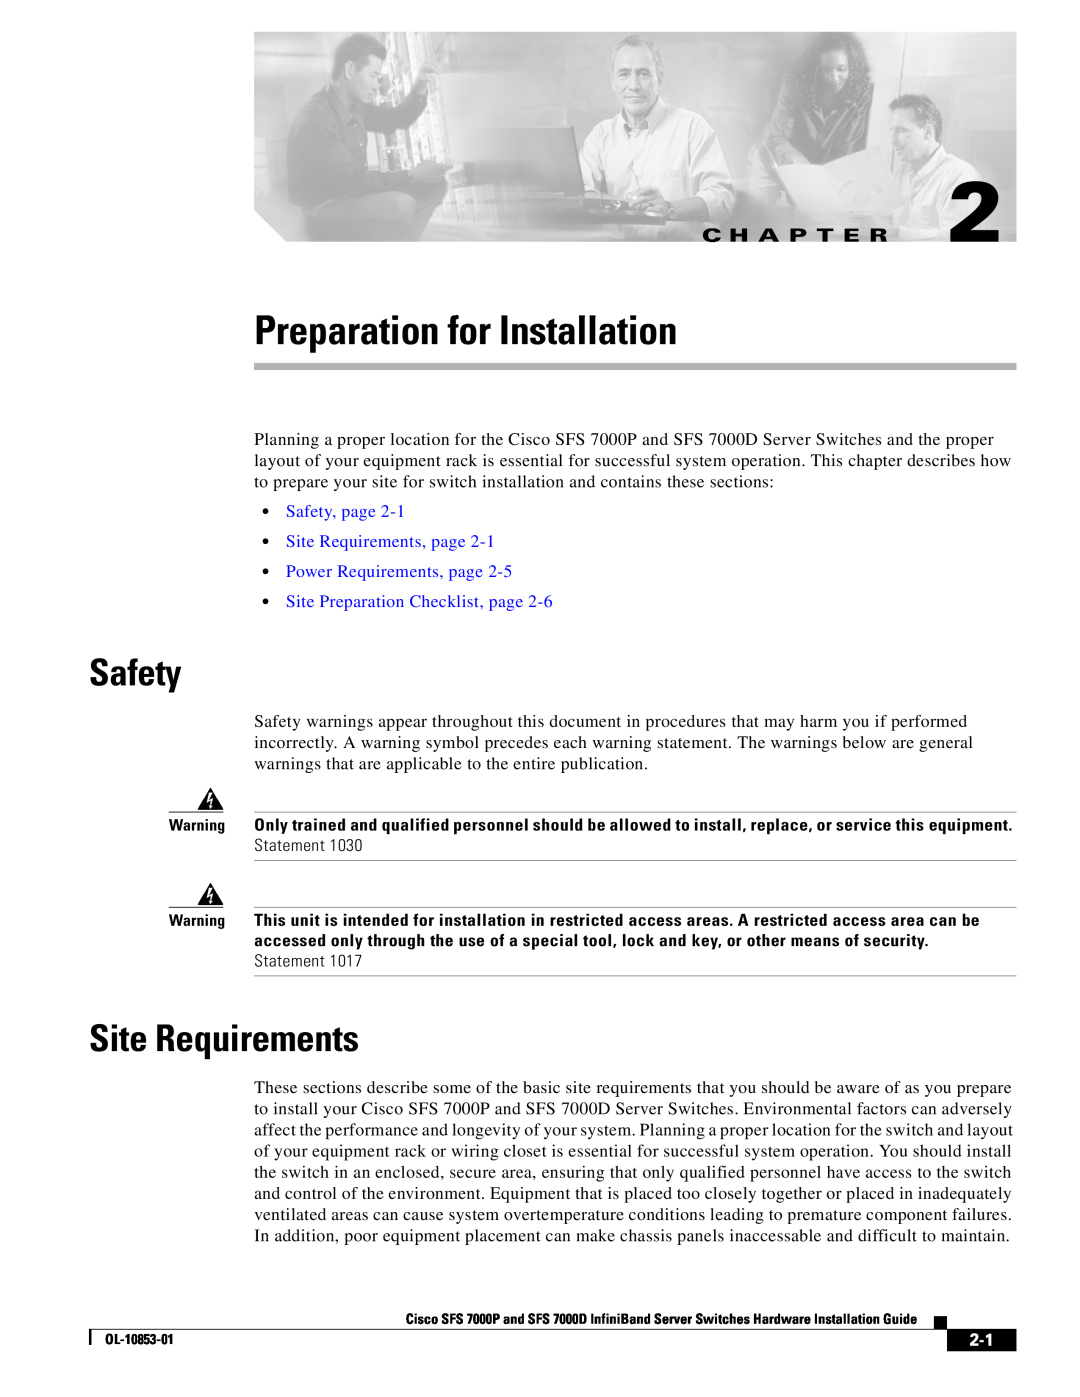 Cisco Systems SFS 7000D, SFS 7000P manual Preparation for Installation, Safety, Site Requirements, C H A P T E R 